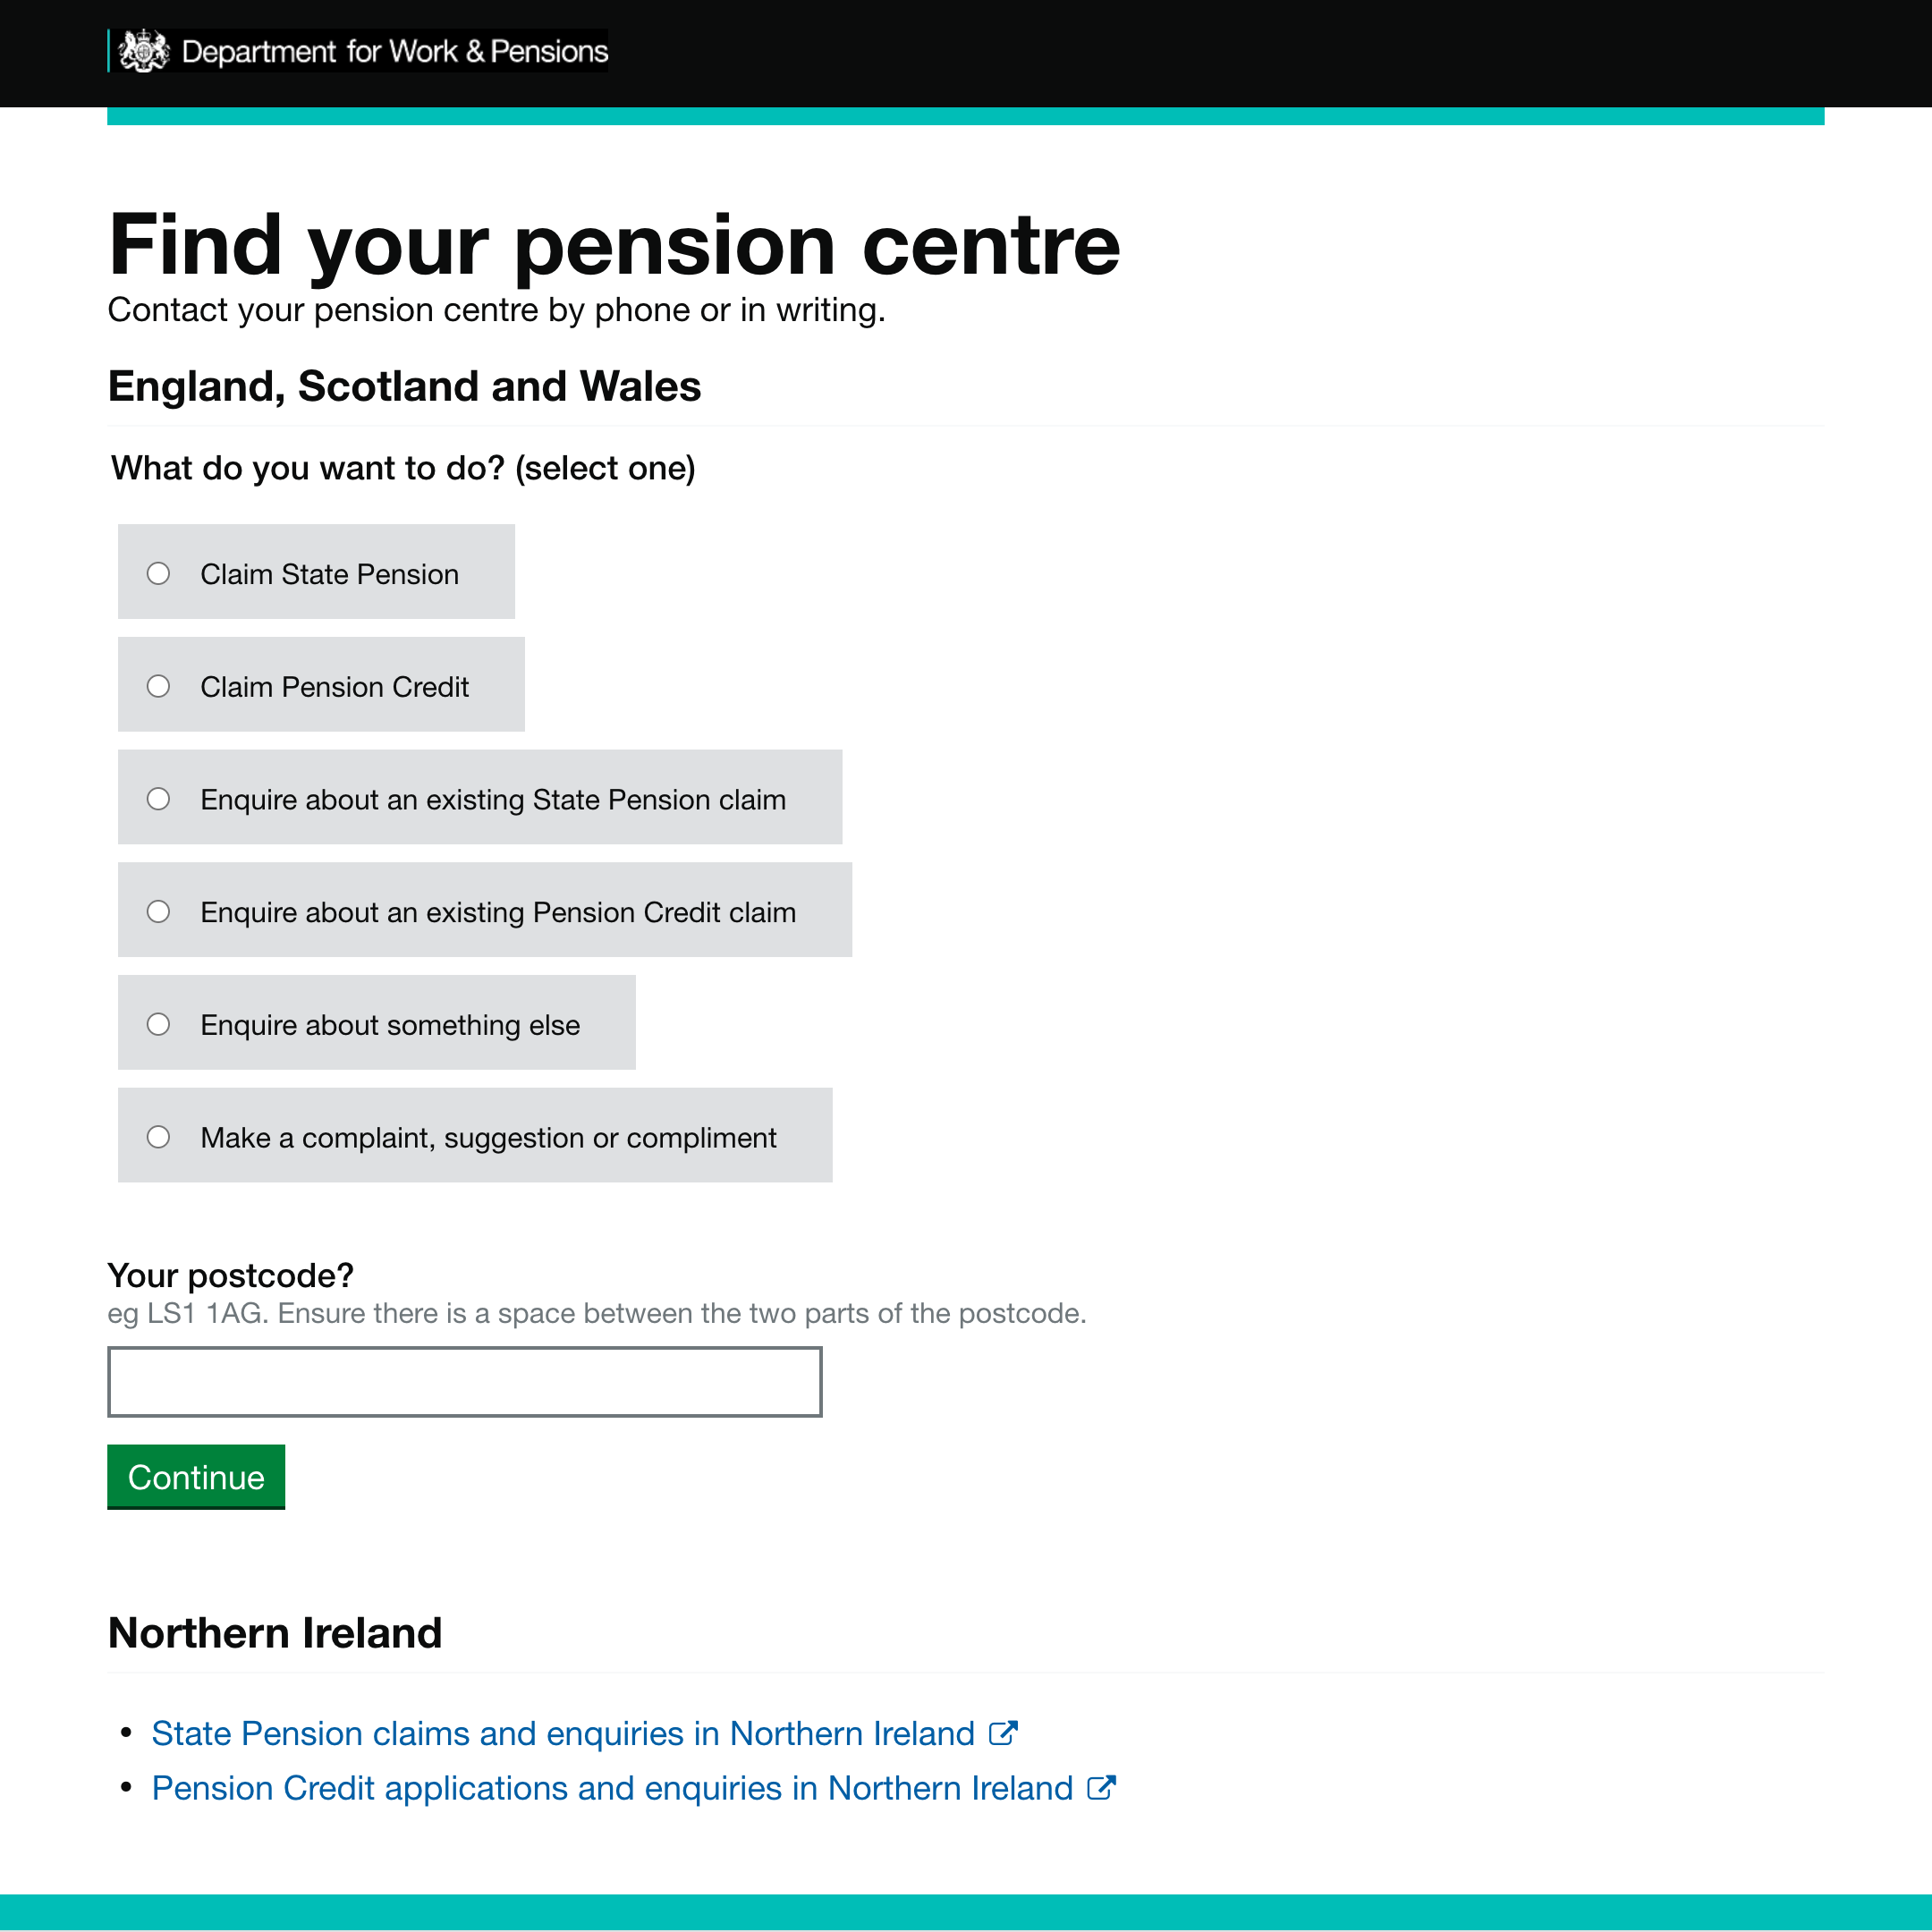 Find your pension centre